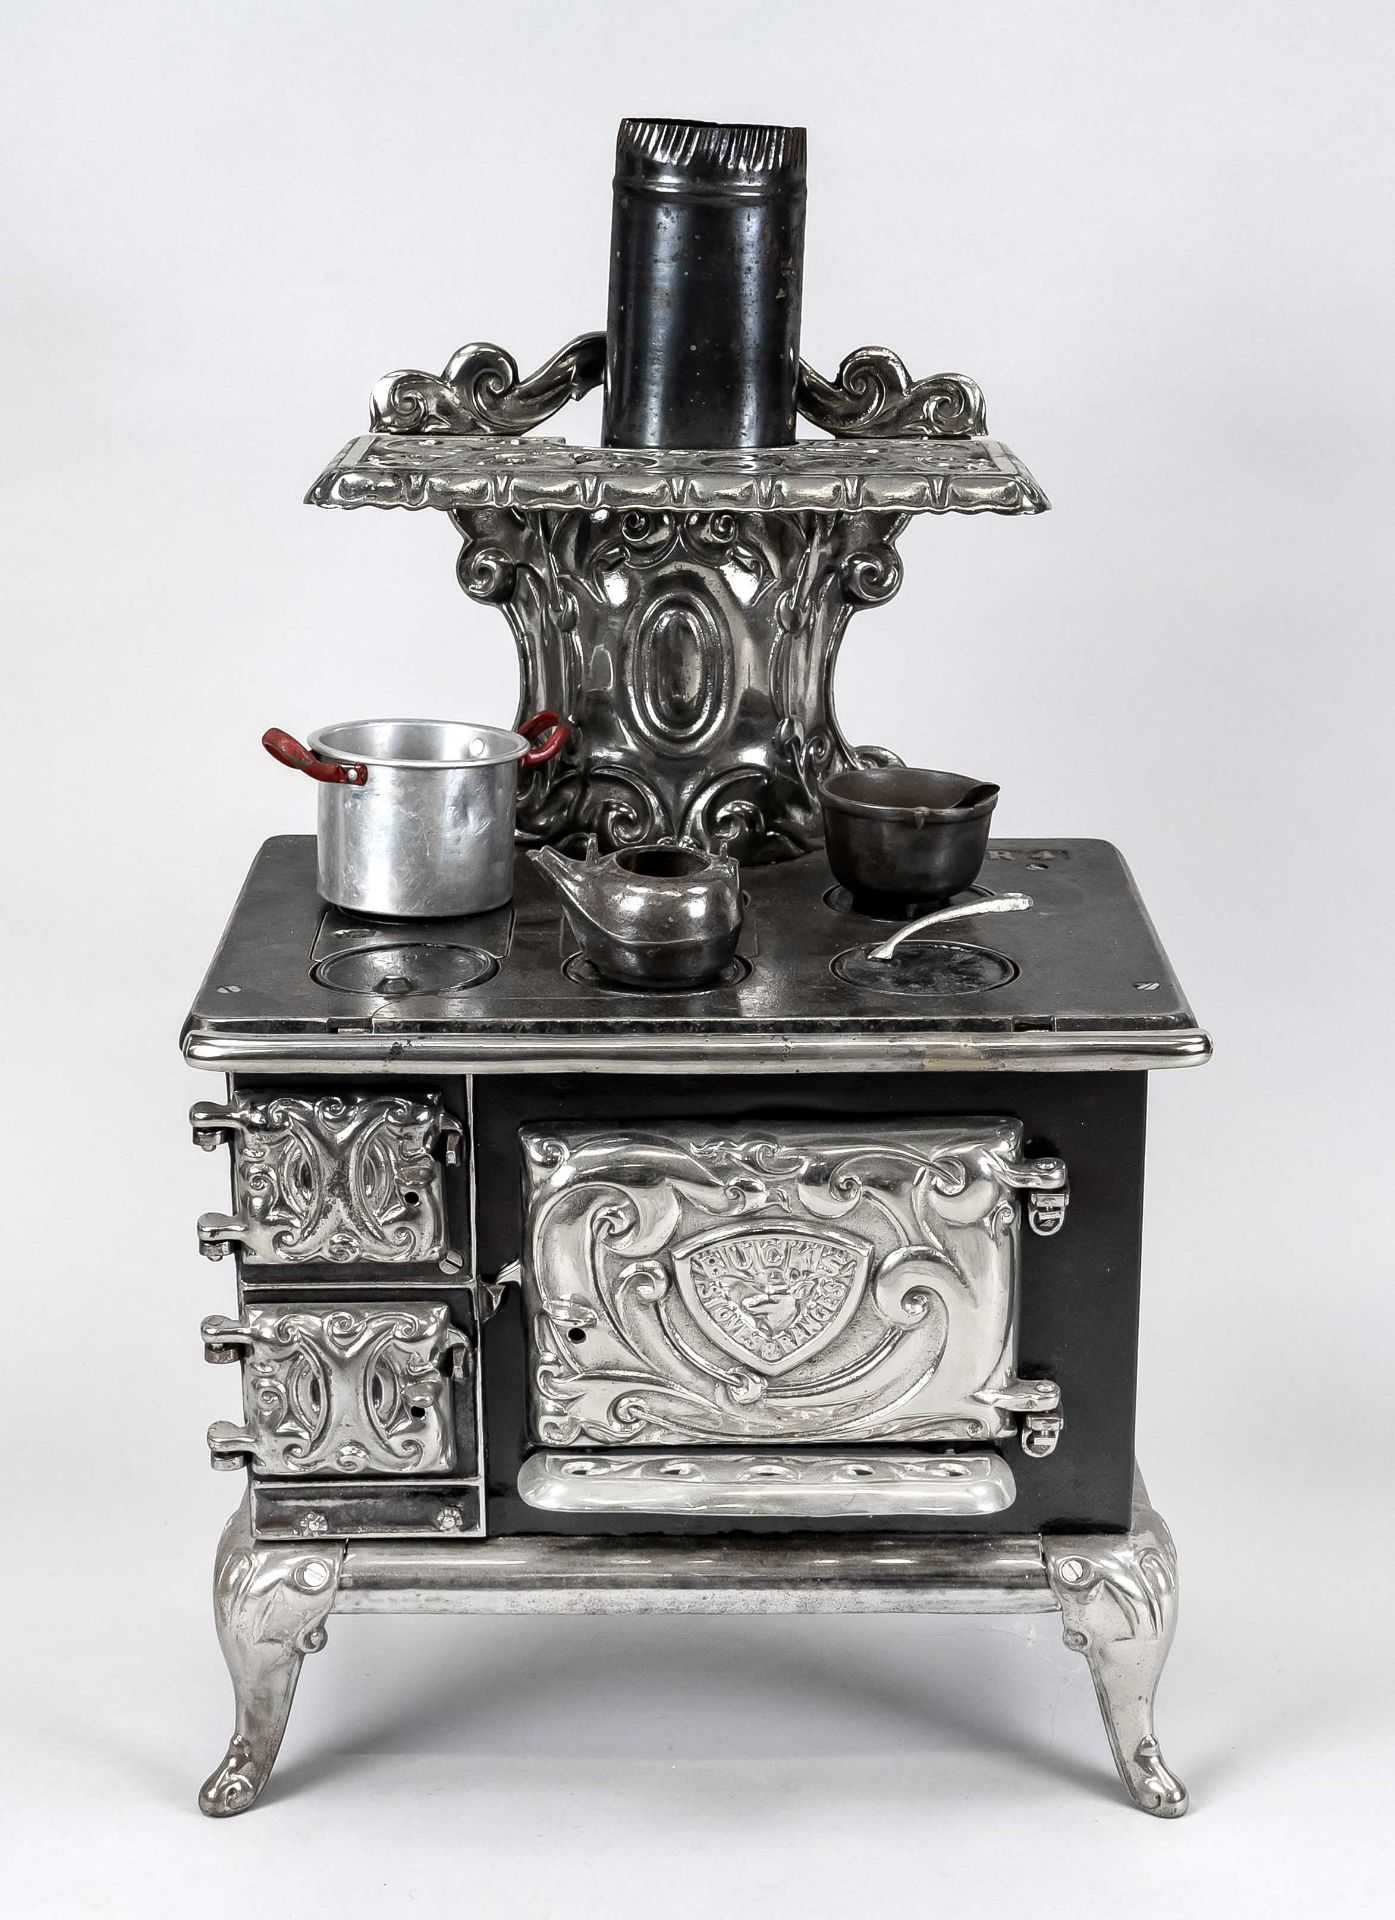 Toy stove, probably England, 19th/20th century, iron partially chrome/nickel-plated. Marked on the